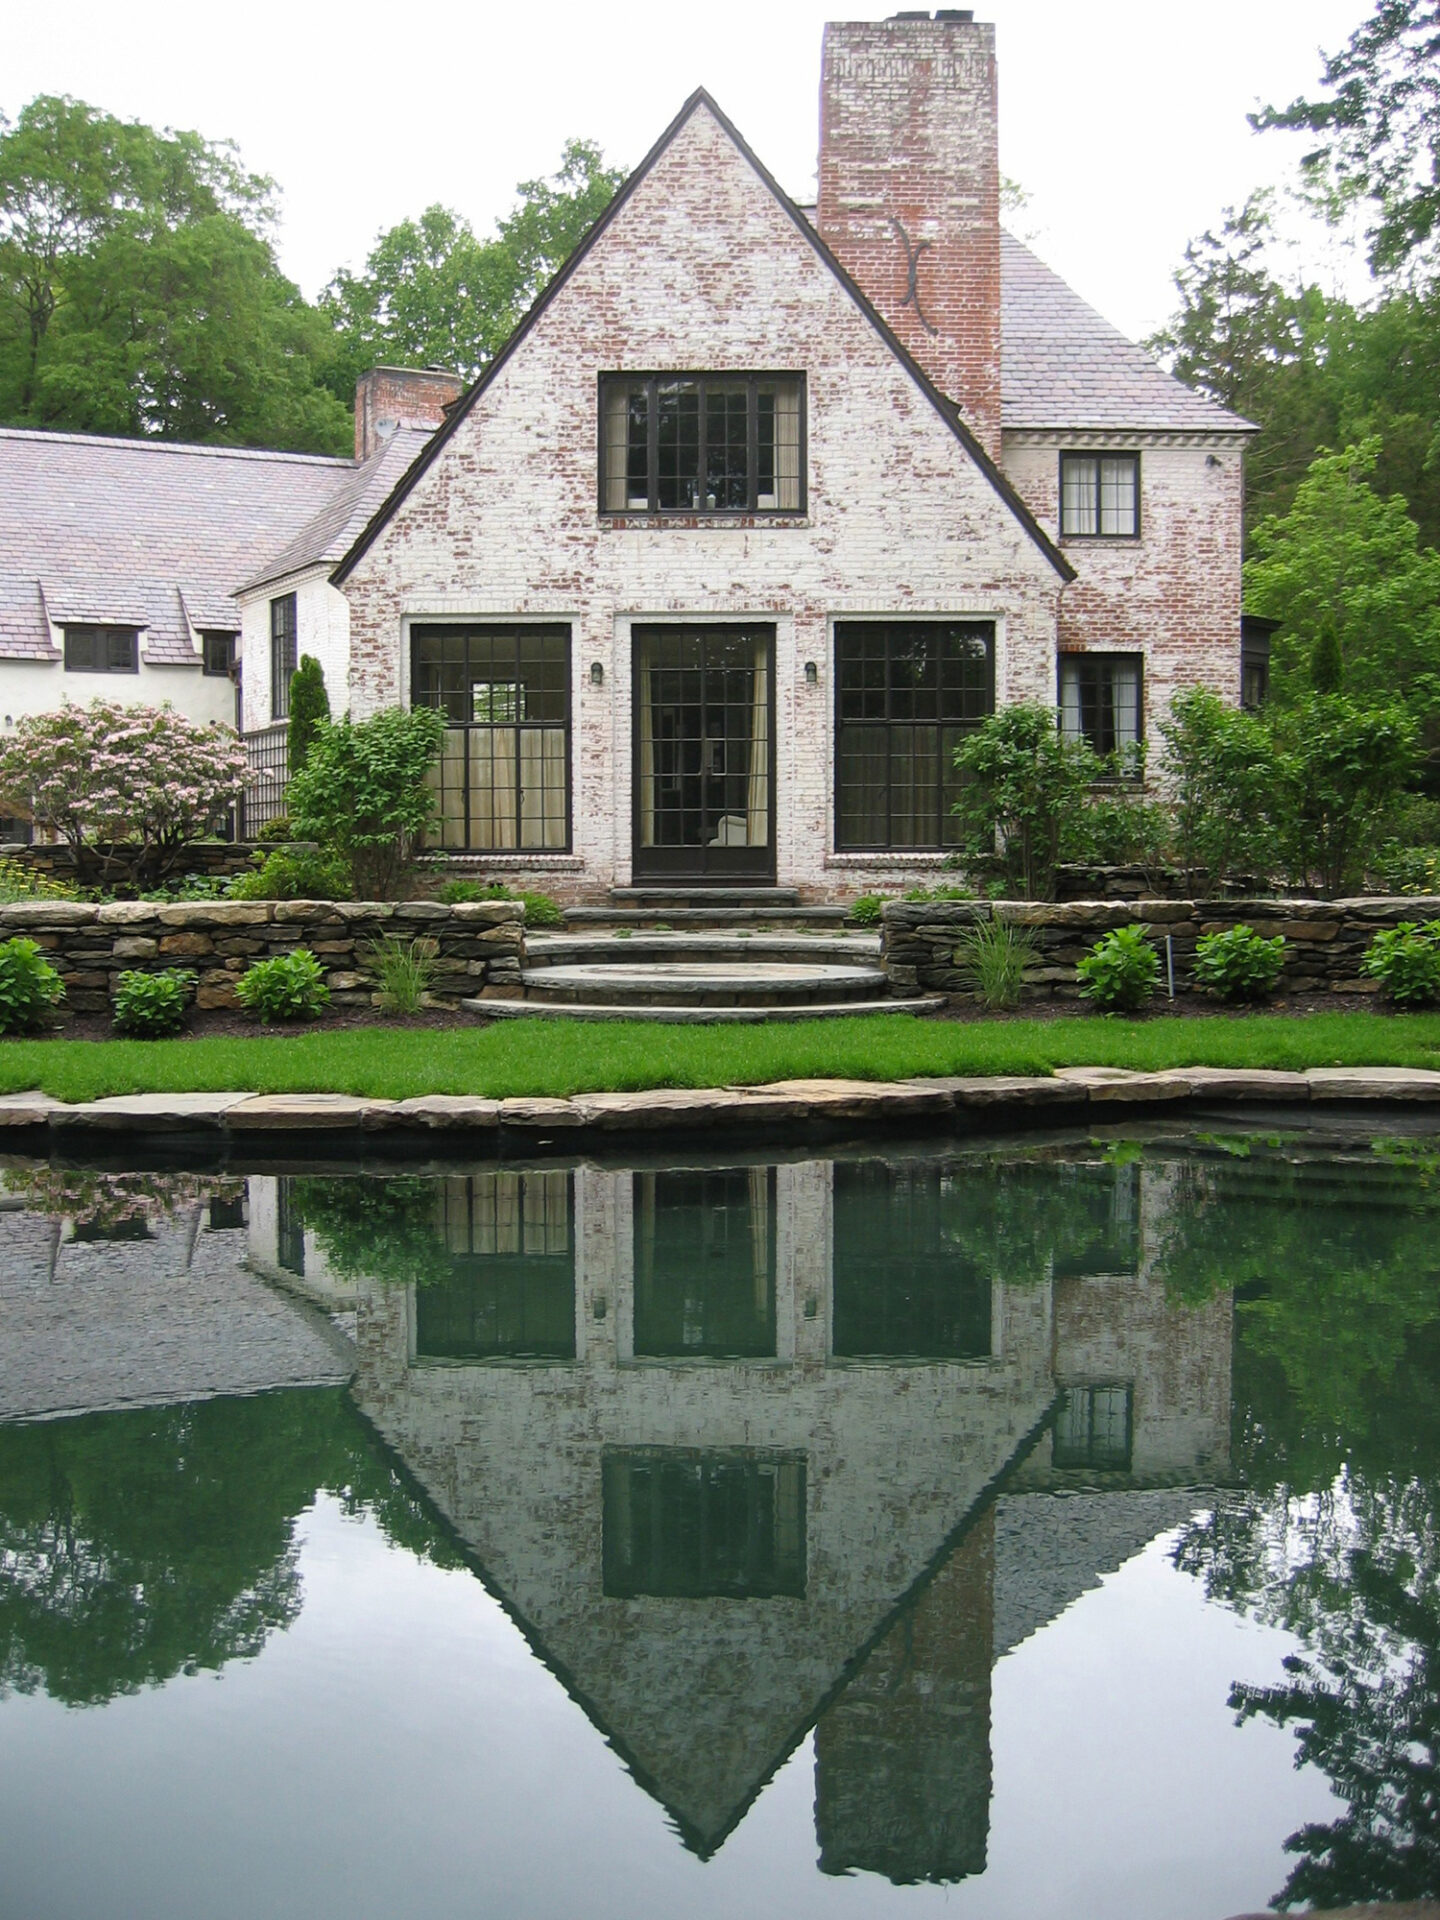 A traditional white brick house with a steep roof, reflected perfectly in a calm pond in front, surrounded by greenery and a stone wall border.